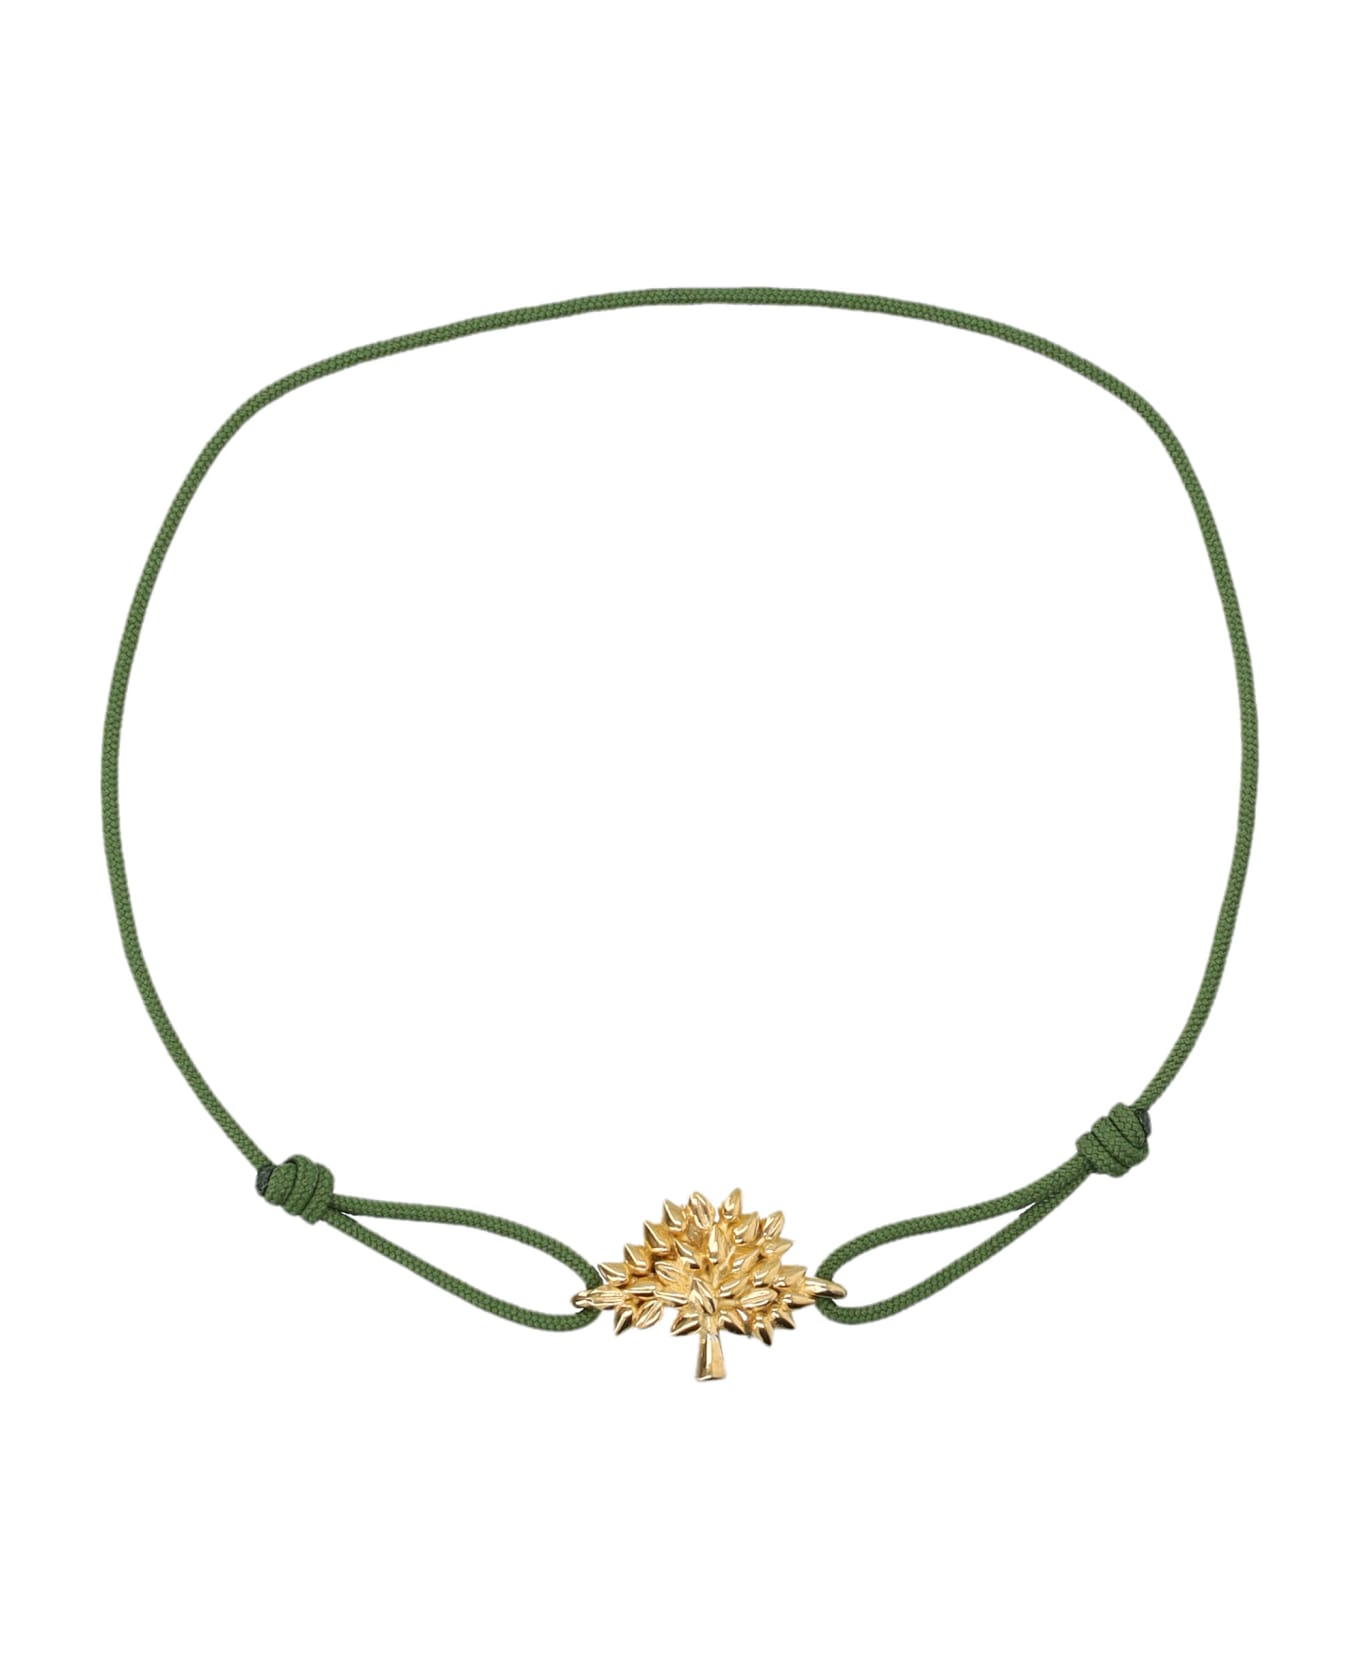 Mulberry Tree Cord Bracelet - MULBERRY GREEN